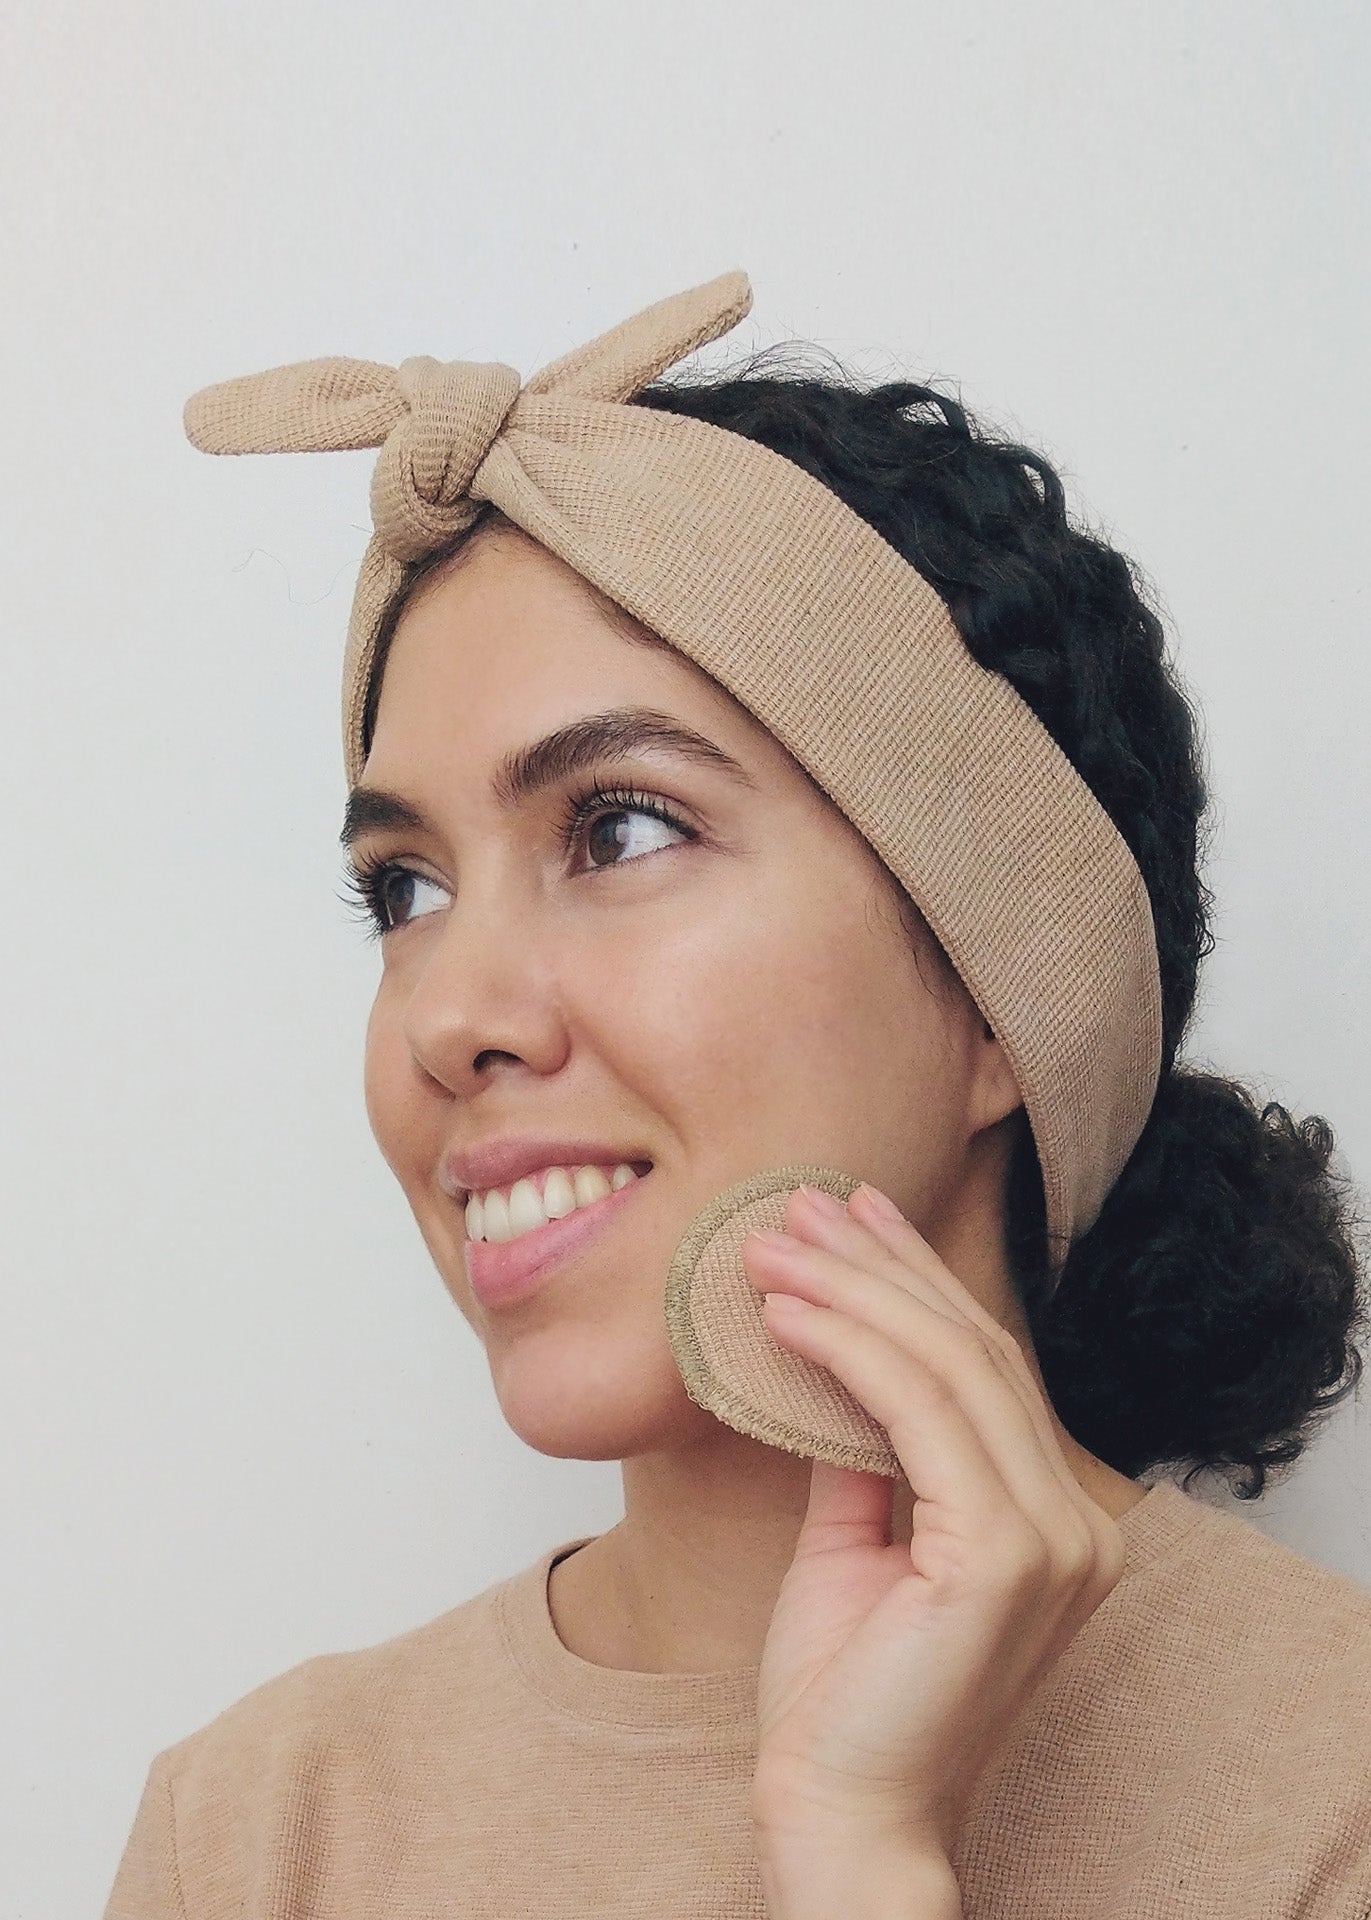 Face Pads & Pouch - Gingham/Brown Organic Cotton